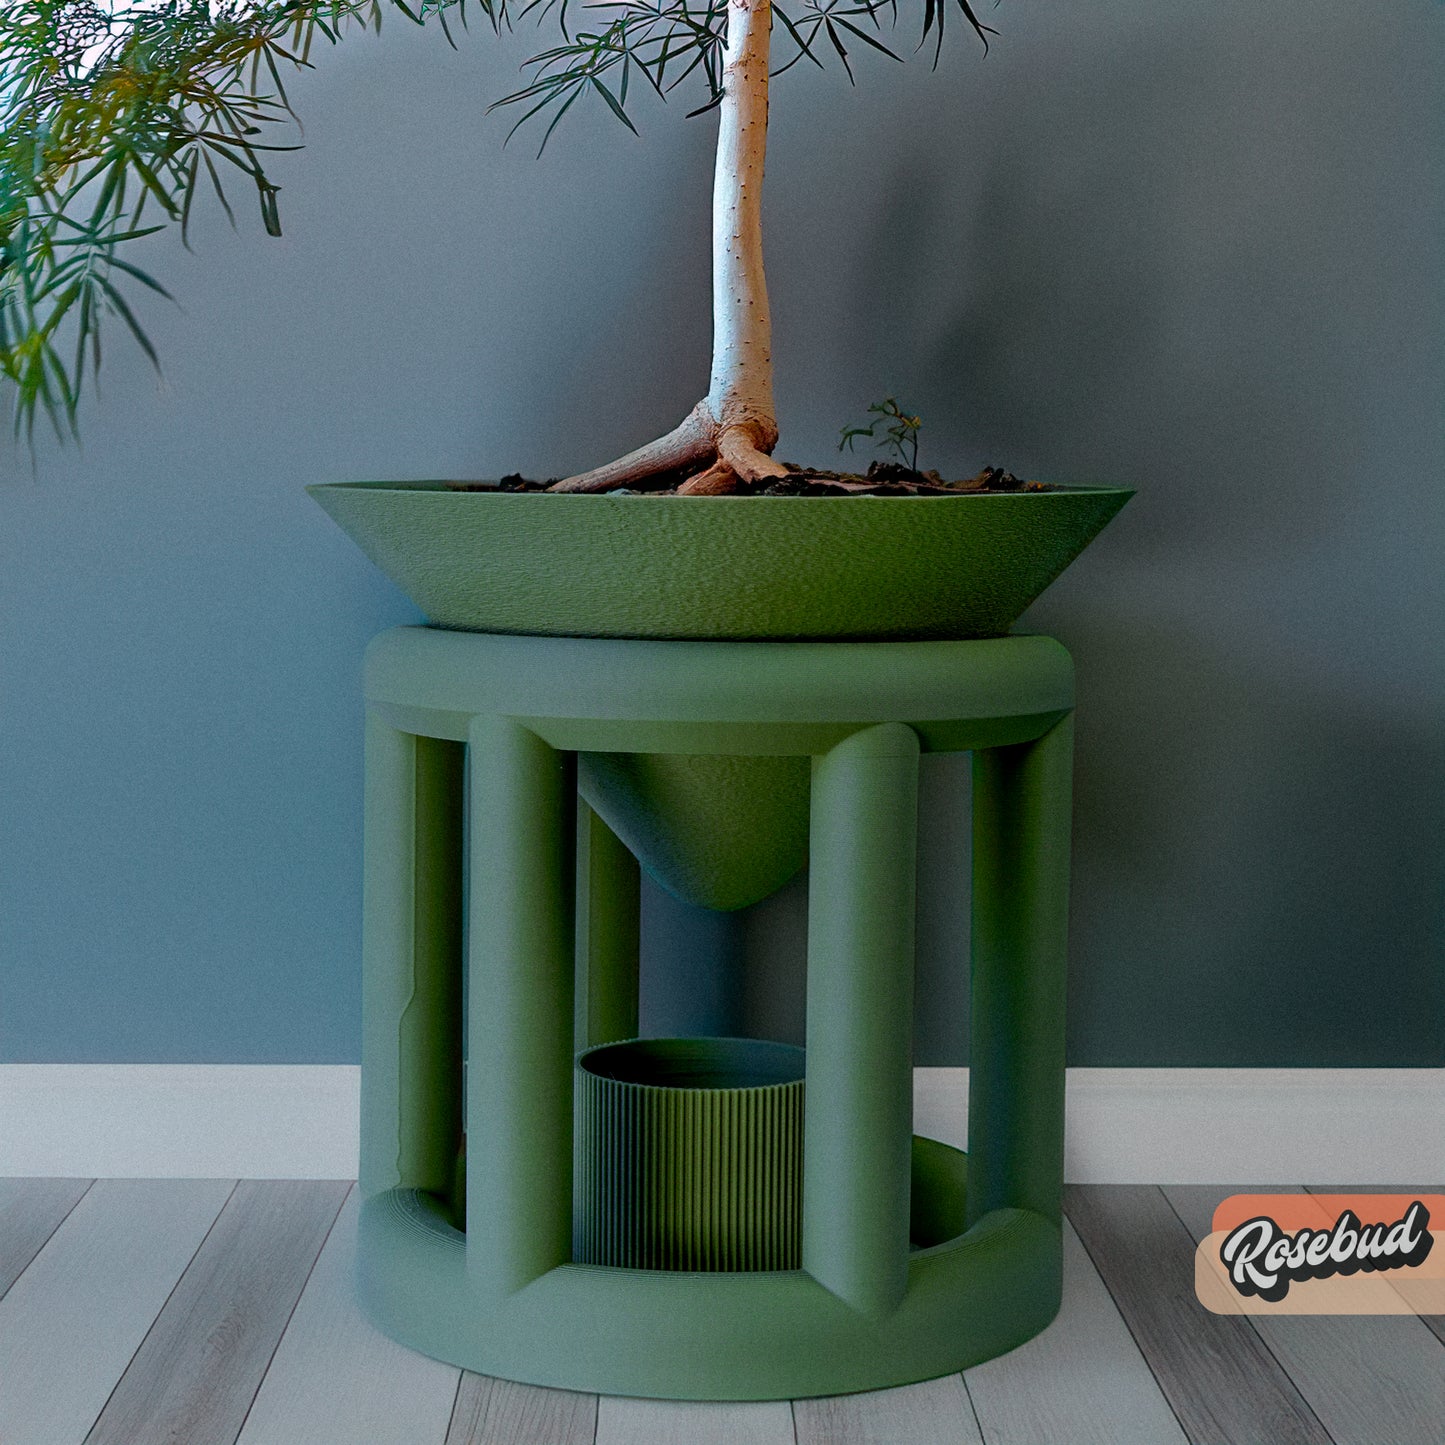 Conduit Plant Stand with Plant Pot for Indoors - Perfect for House Plants and Plant Lovers, Gift for Plant Lover, Art Deco Planter Stands